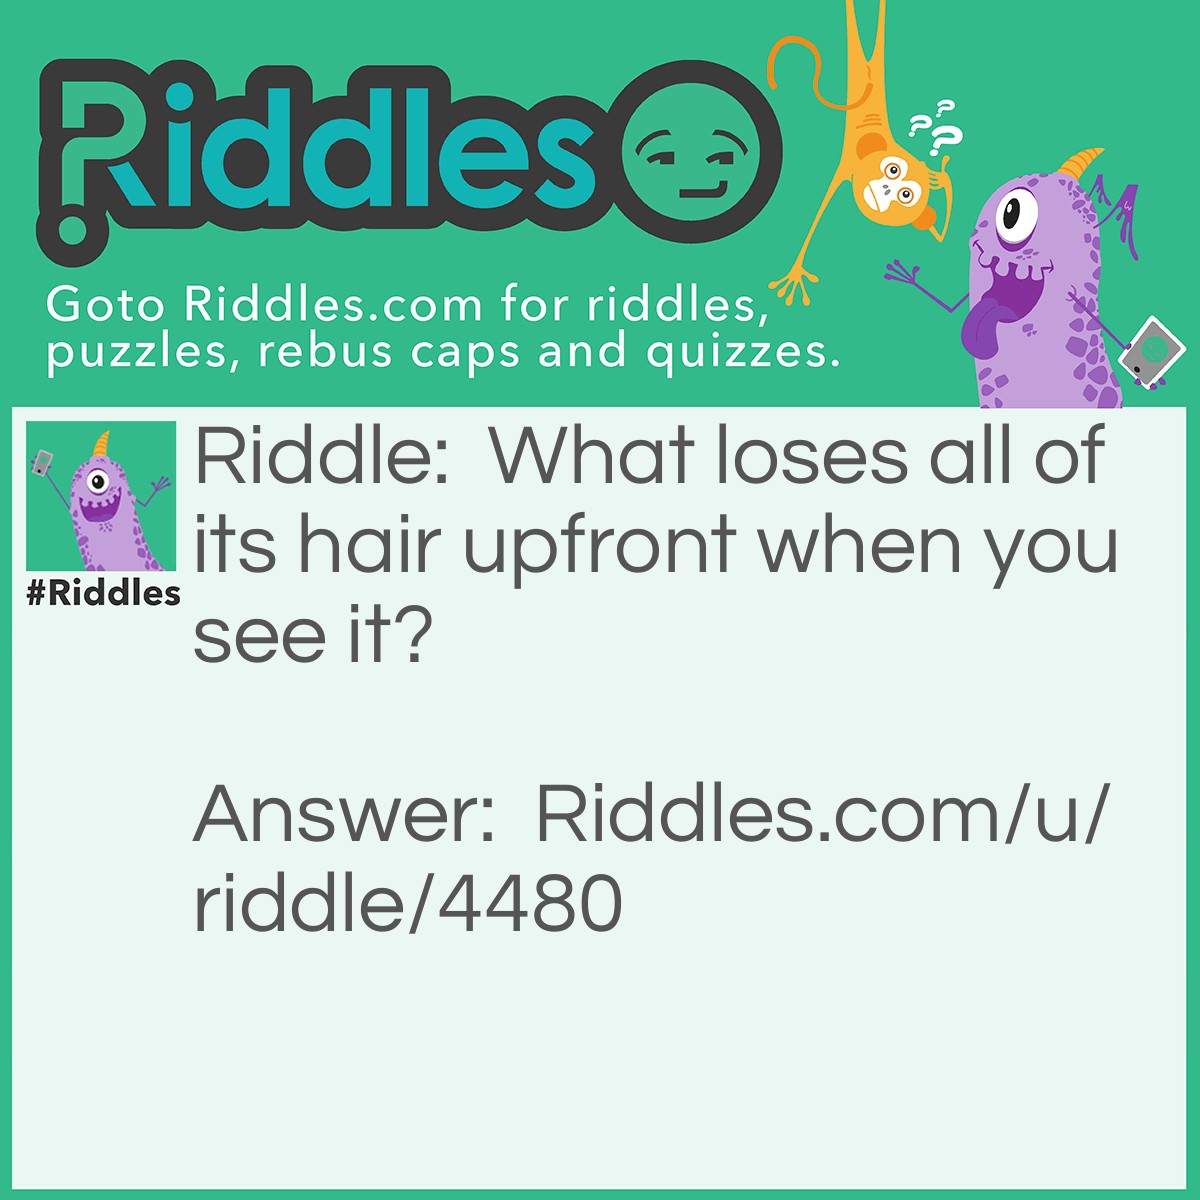 Riddle: What loses all of its hair upfront when you see it? Answer: idk the answer ;(